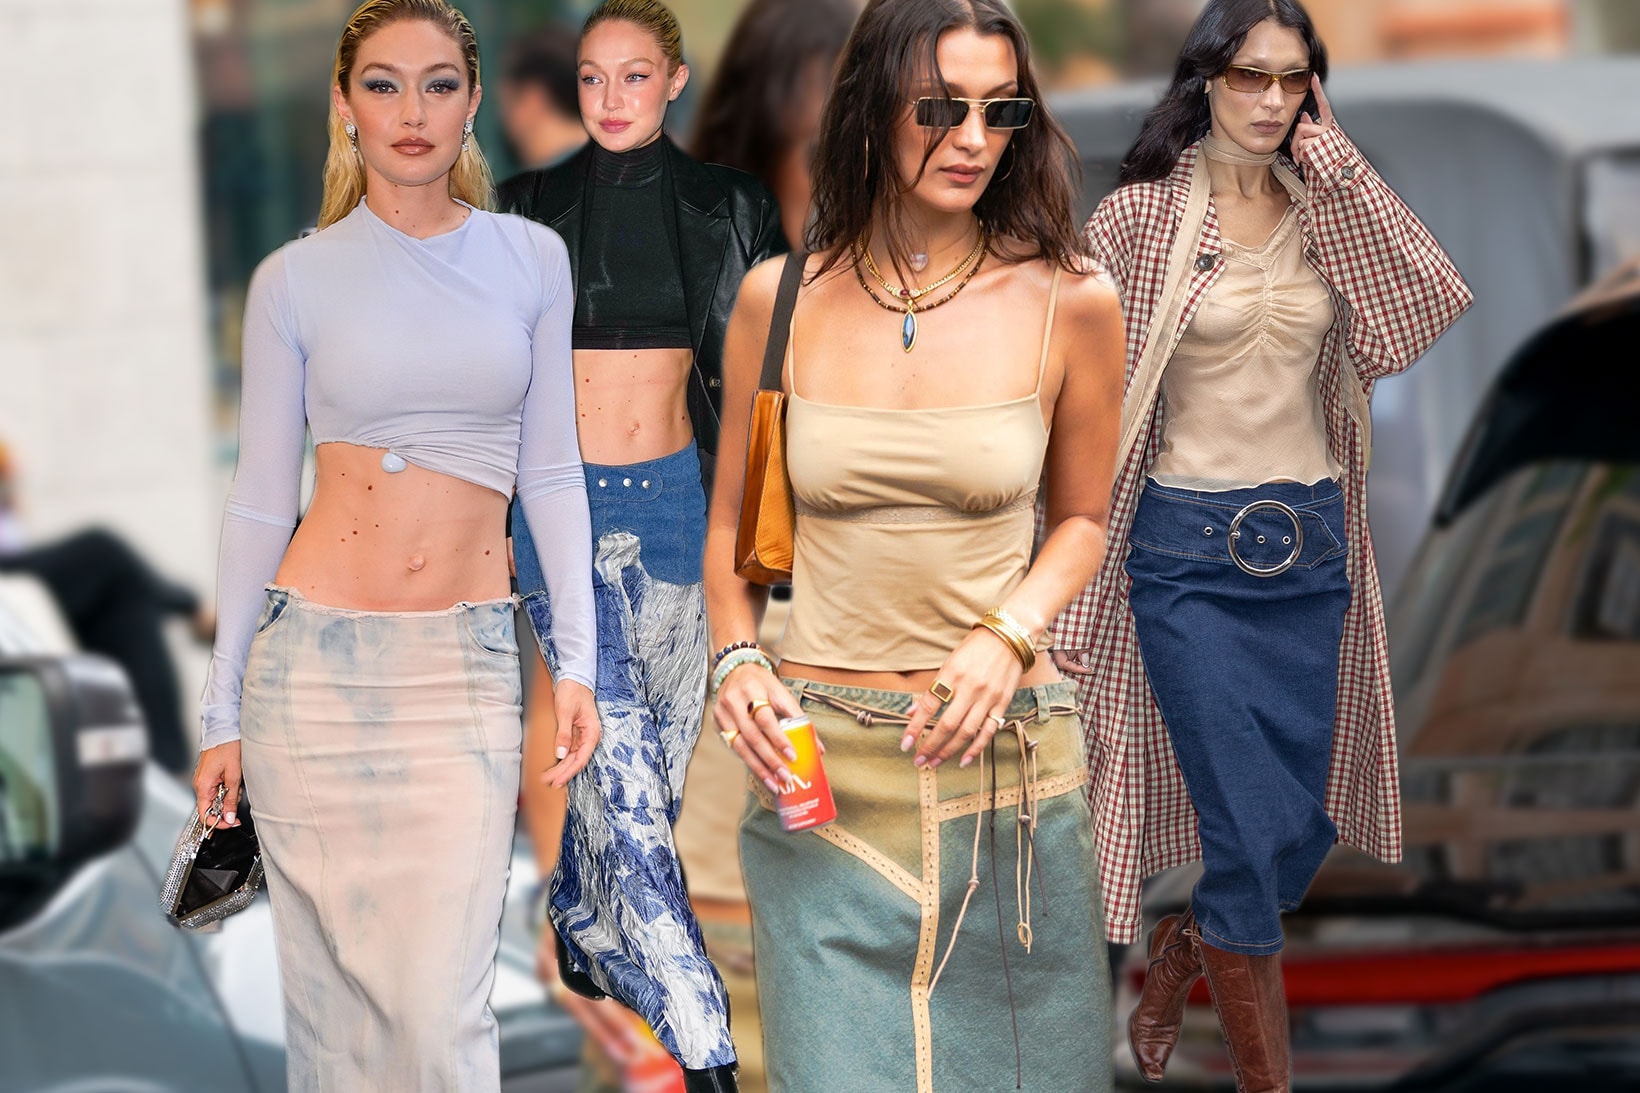 Denim Maxi Skeptic? Let These Celebrities Show You the Light